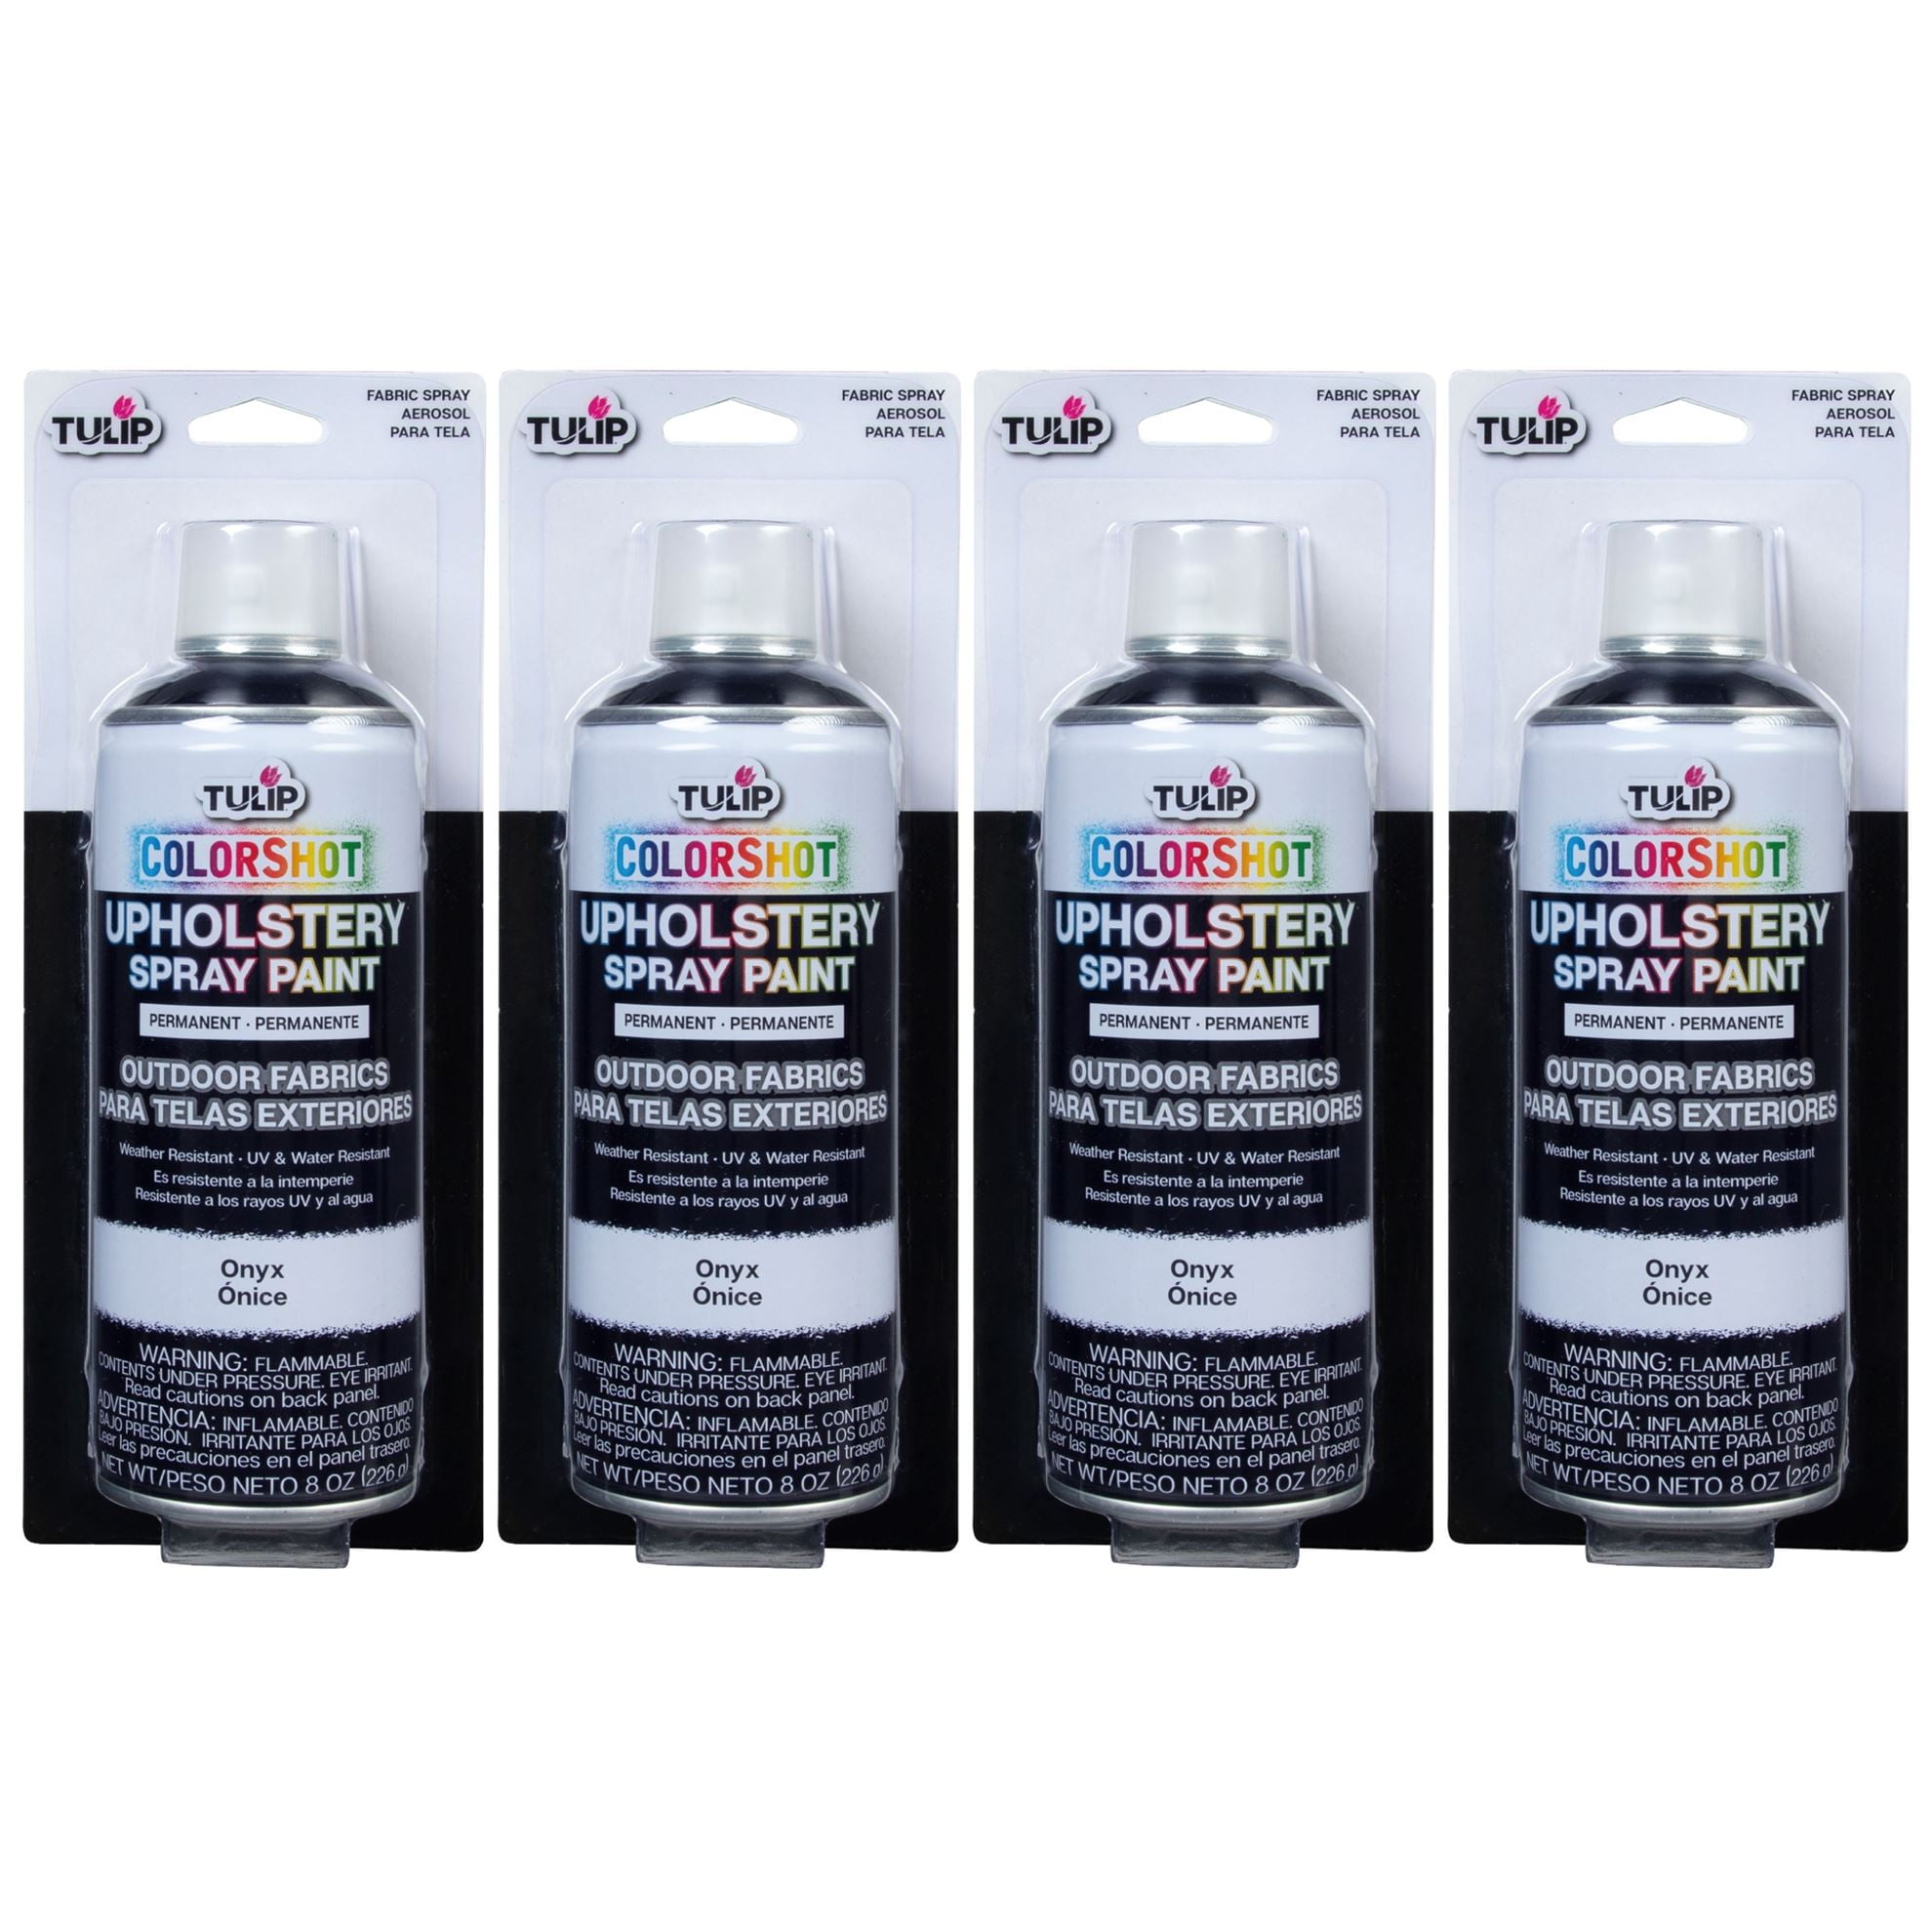 Tulip Colorshot Outdoor Fabric Upholstery Spray Onyx Black 4 Pack